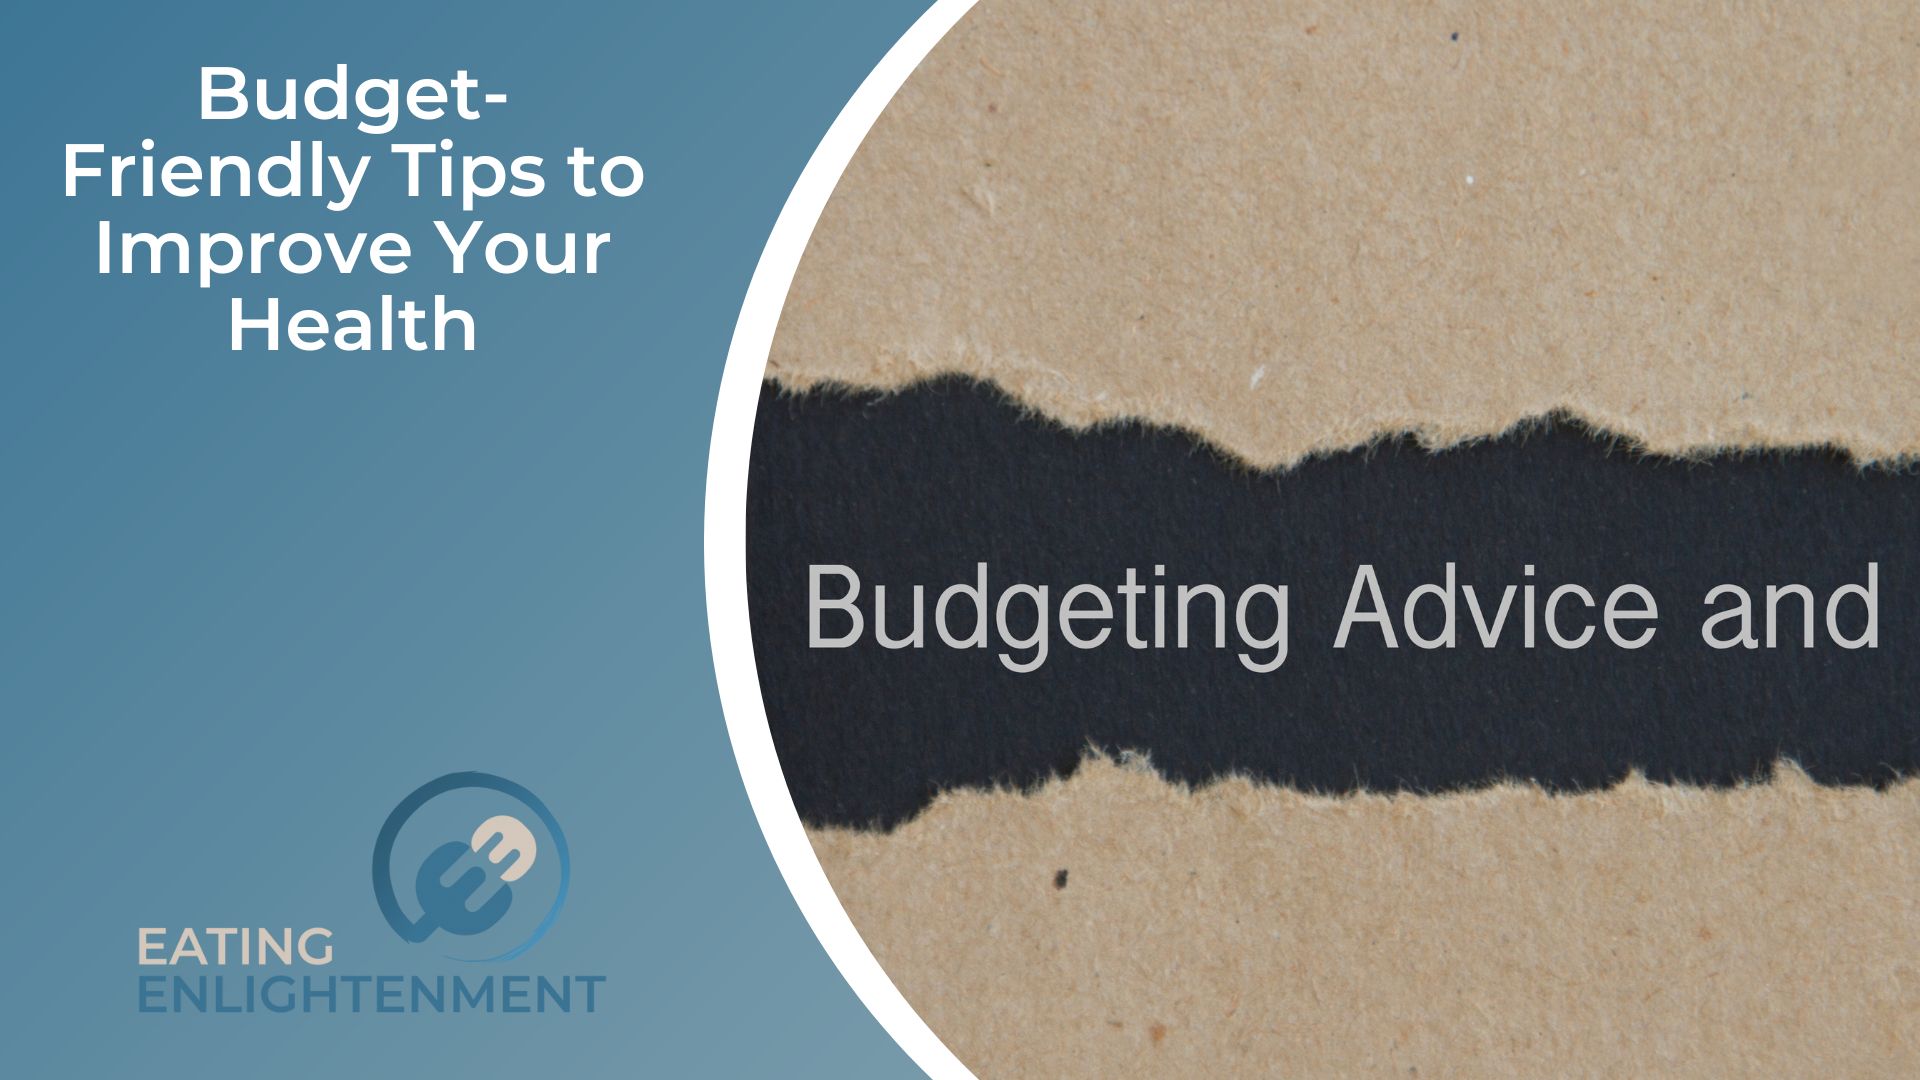 Budget-Friendly Tips to Improve Your Health